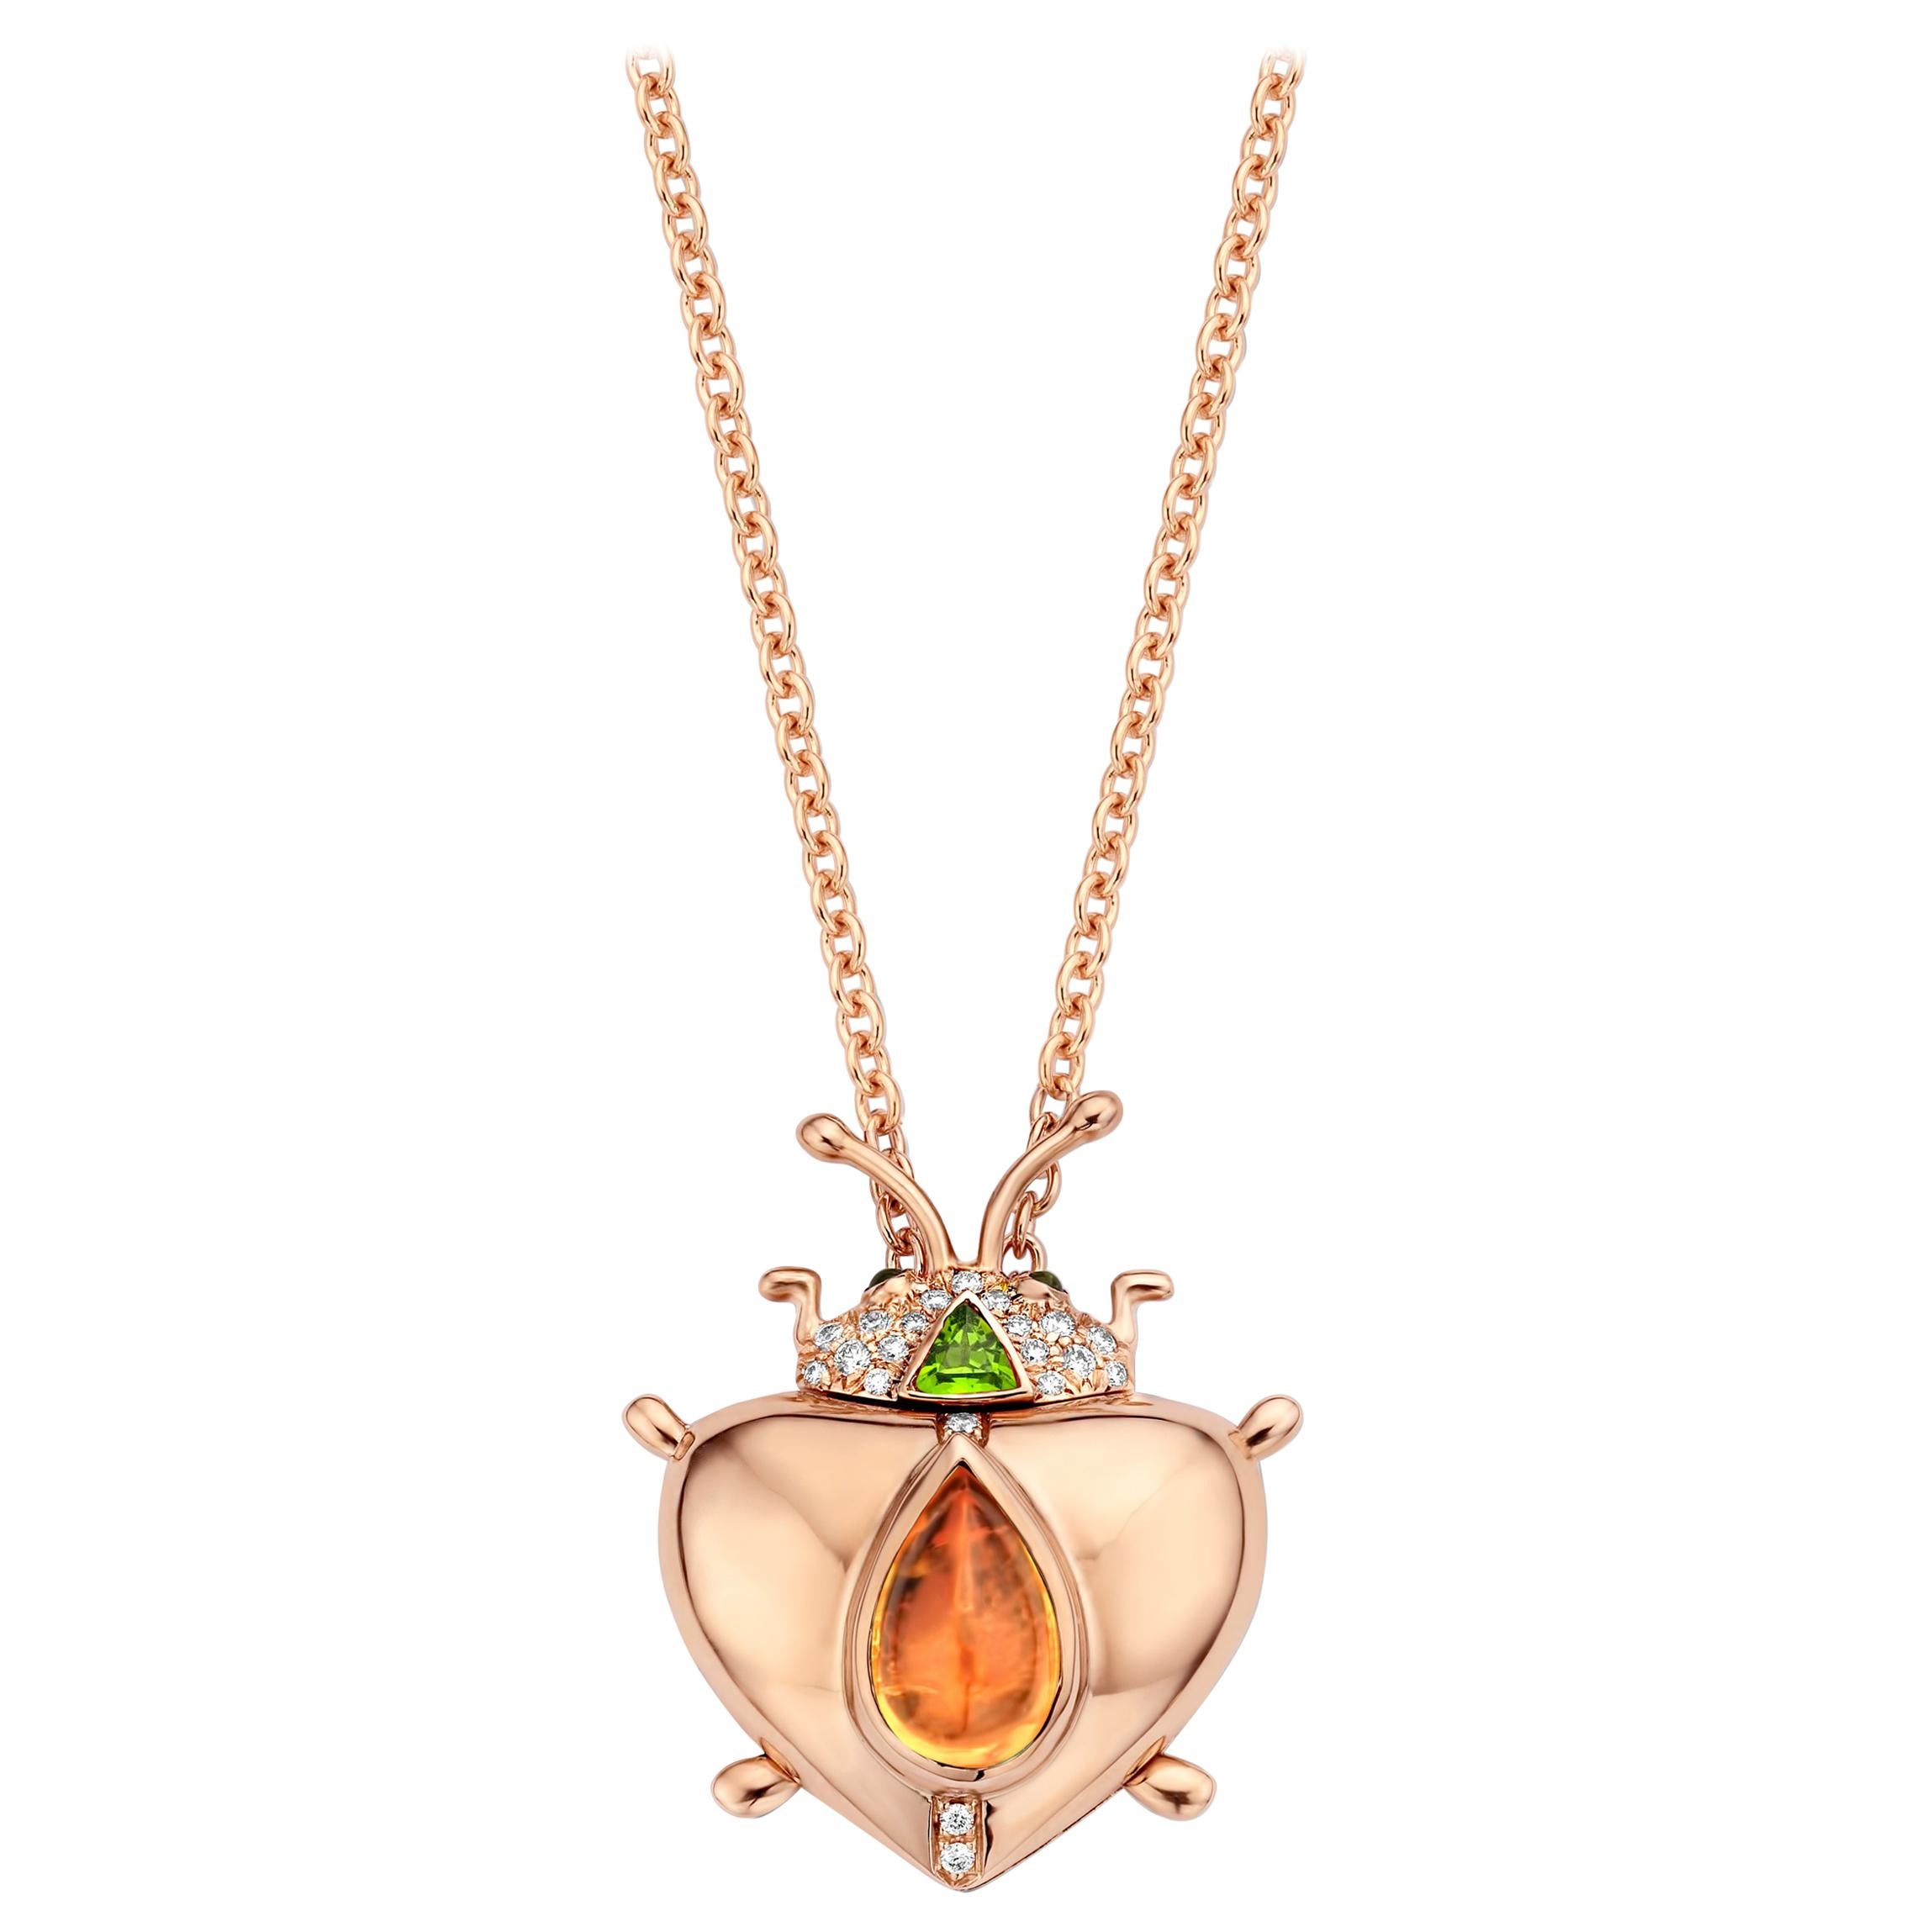 One of a kind lucky beetle necklace in 18K rose gold 17,6g set with the finest diamonds in brilliant cut 0,14Ct (VVS/DEF quality) and one natural, Mandarin garnet in pear cabochon cut 2,79Ct. The head and eyes are set with tsavorites in round